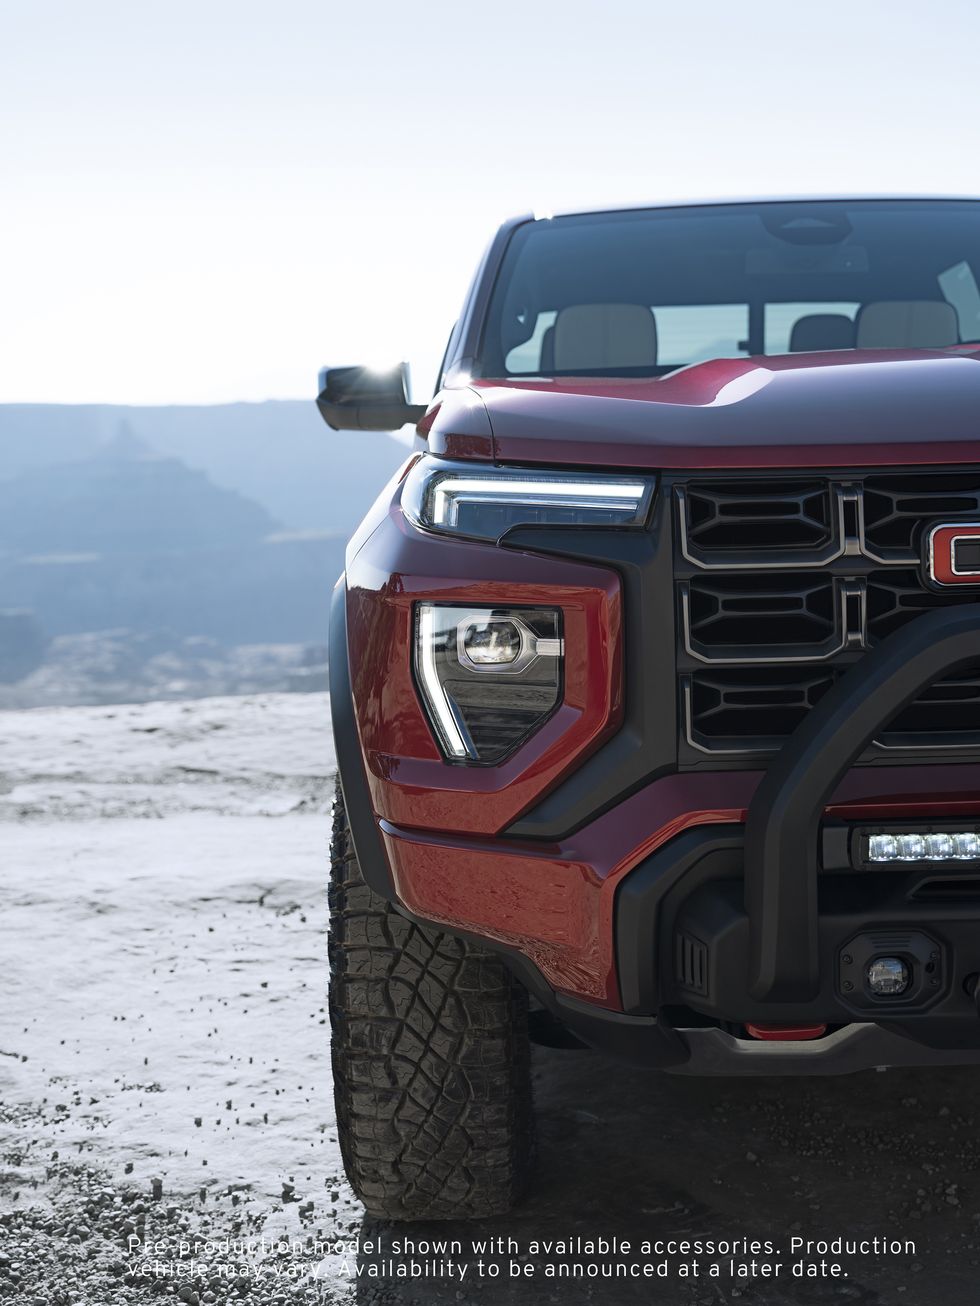 2023 GMC Canyon Teased in AT4X Off-Road Trim Ahead of Debut